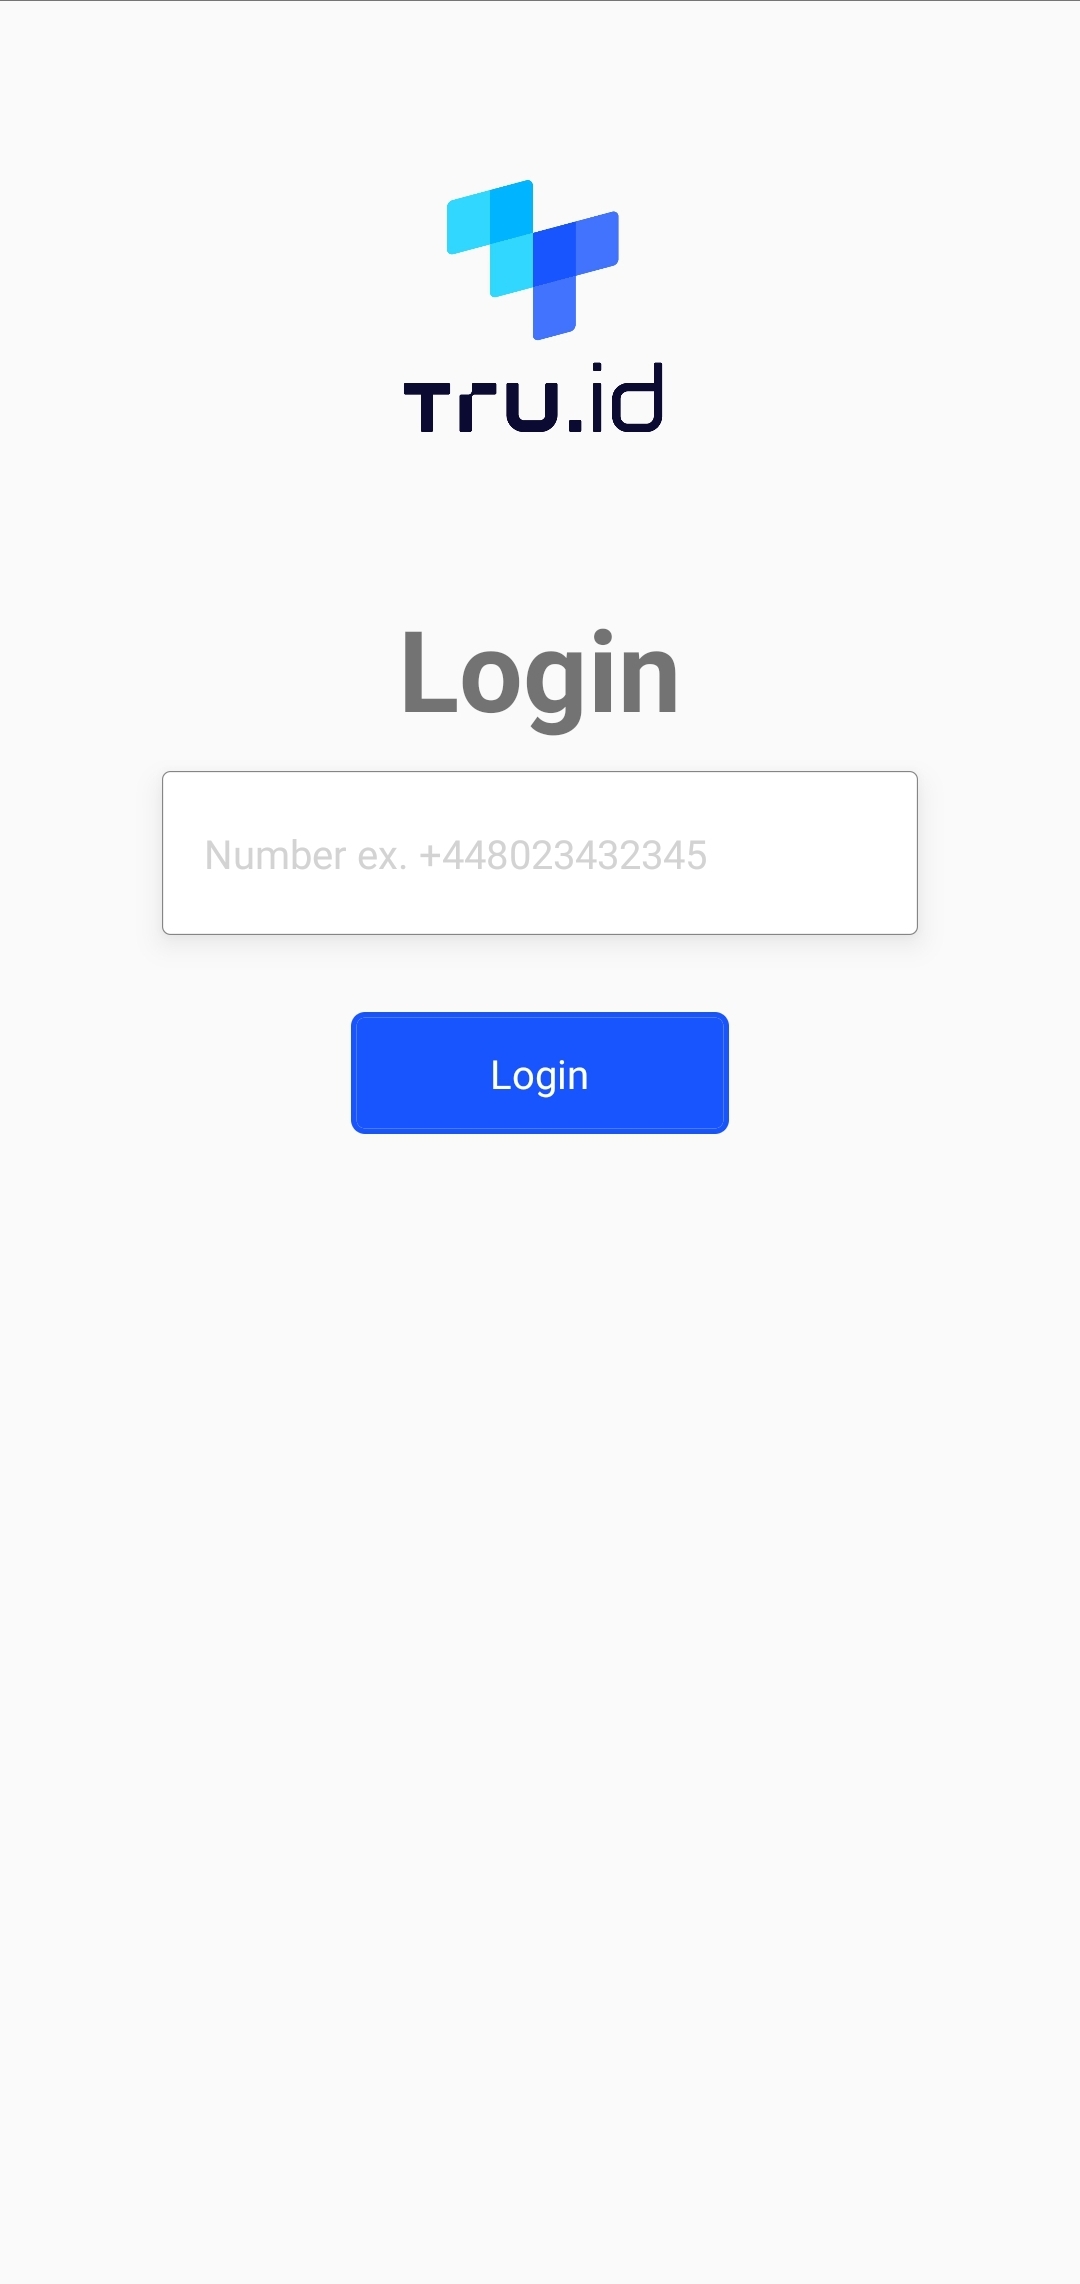 A tru.ID mobile app screen with the tru.ID logo, a phone number text input and a submit button.